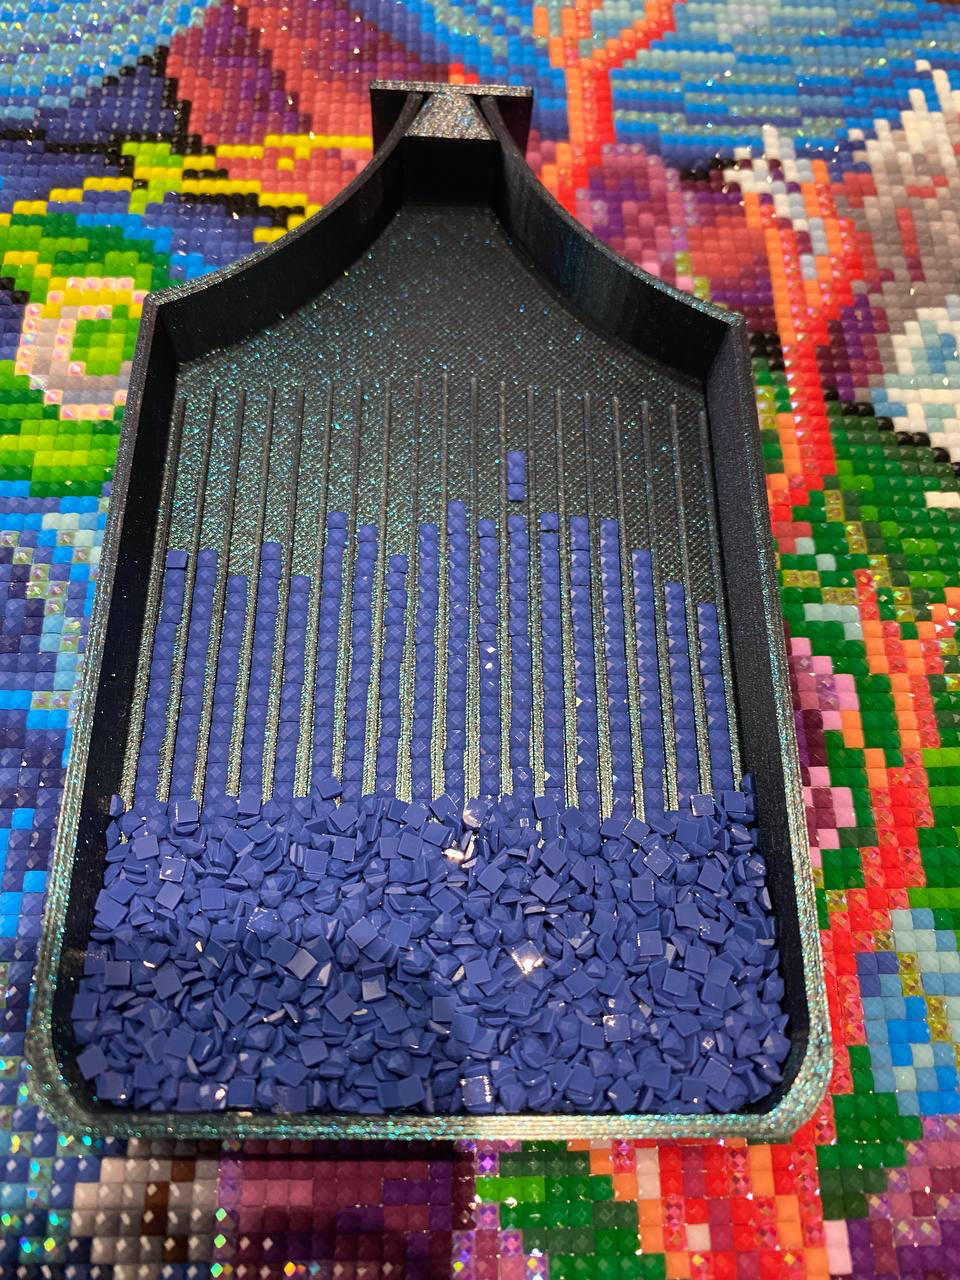 DiamondDrillsUSA - Small Purple Drill Tray With Pour Spout for Diamond  Painting Drills